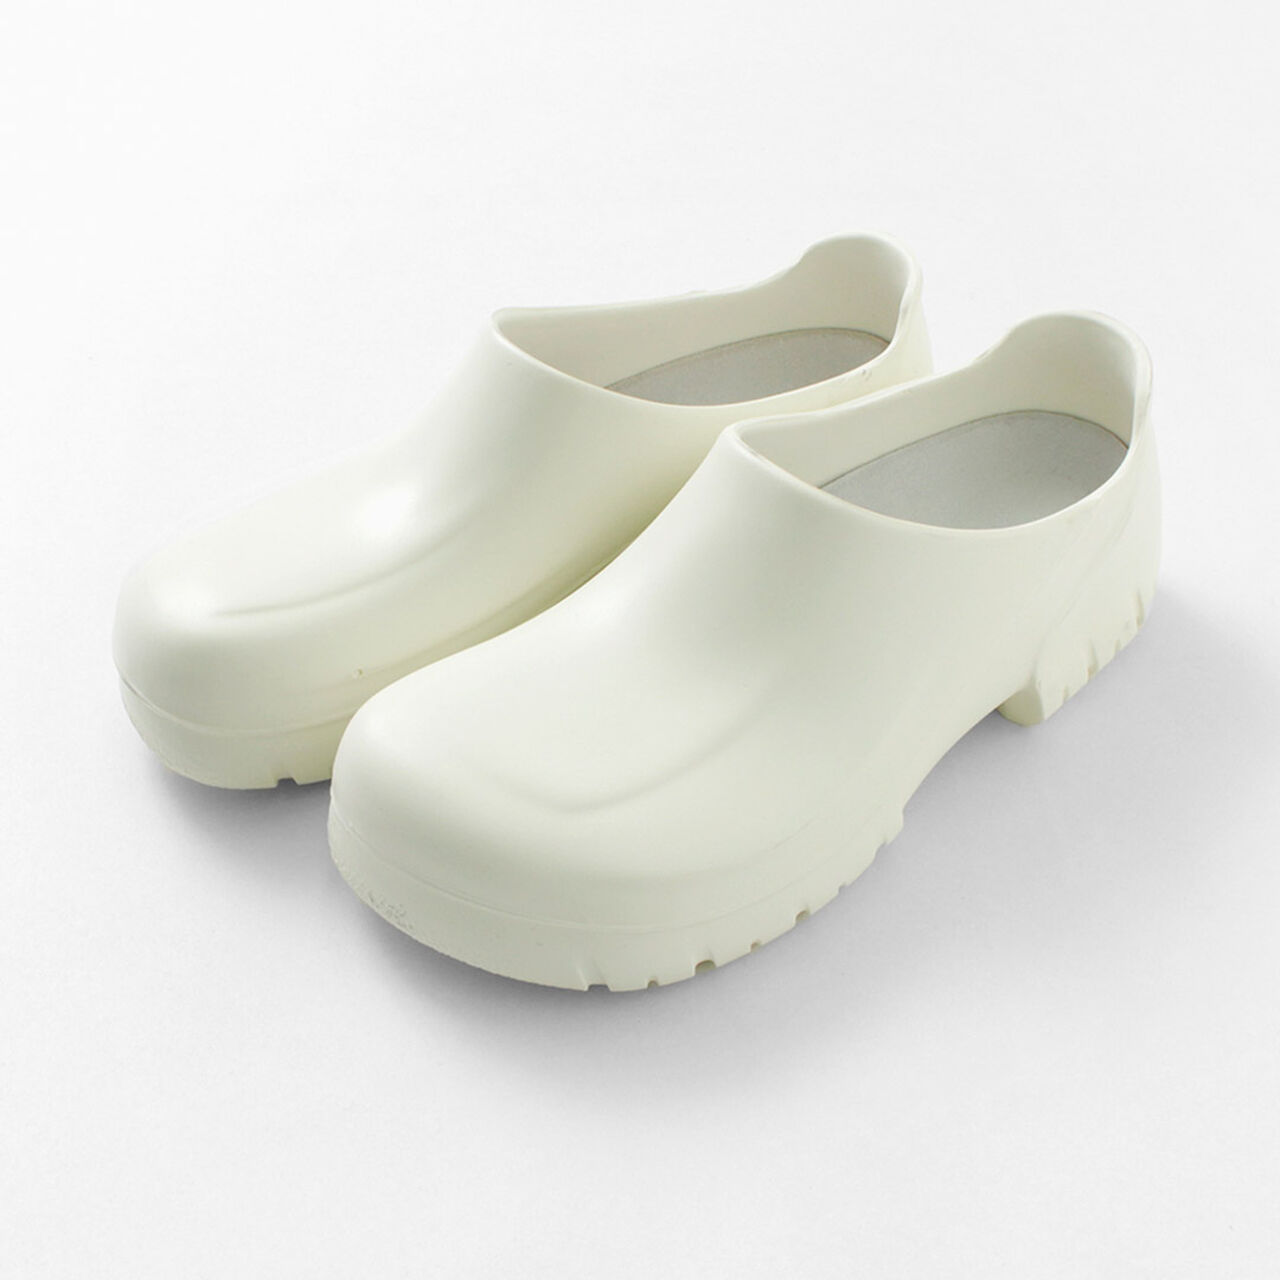 A630 Cock Shoes Clog Sandals,White, large image number 0